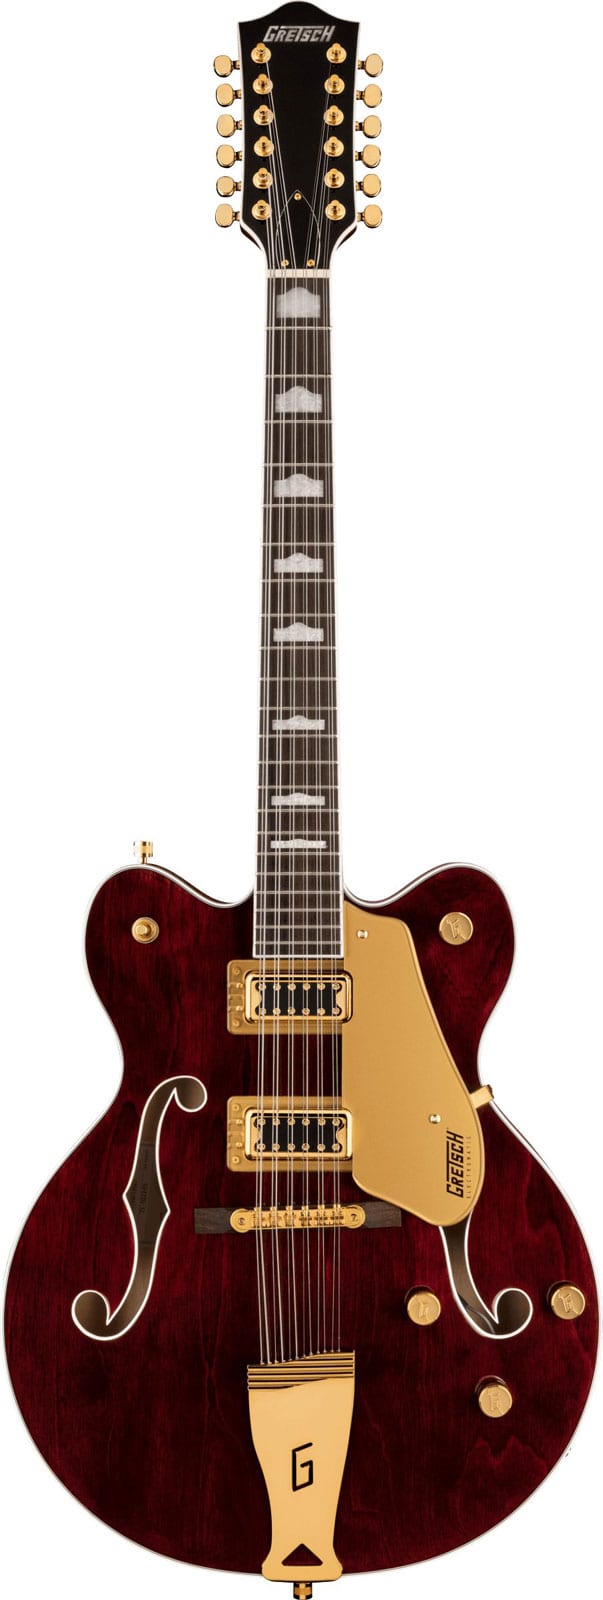 GRETSCH GUITARS G5422G-12 ELECTROMATIC CLASSIC HOLLOW BODY DOUBLE-CUT 12-STRING WITH GOLD HARDWARE LRL WALNUT STAIN